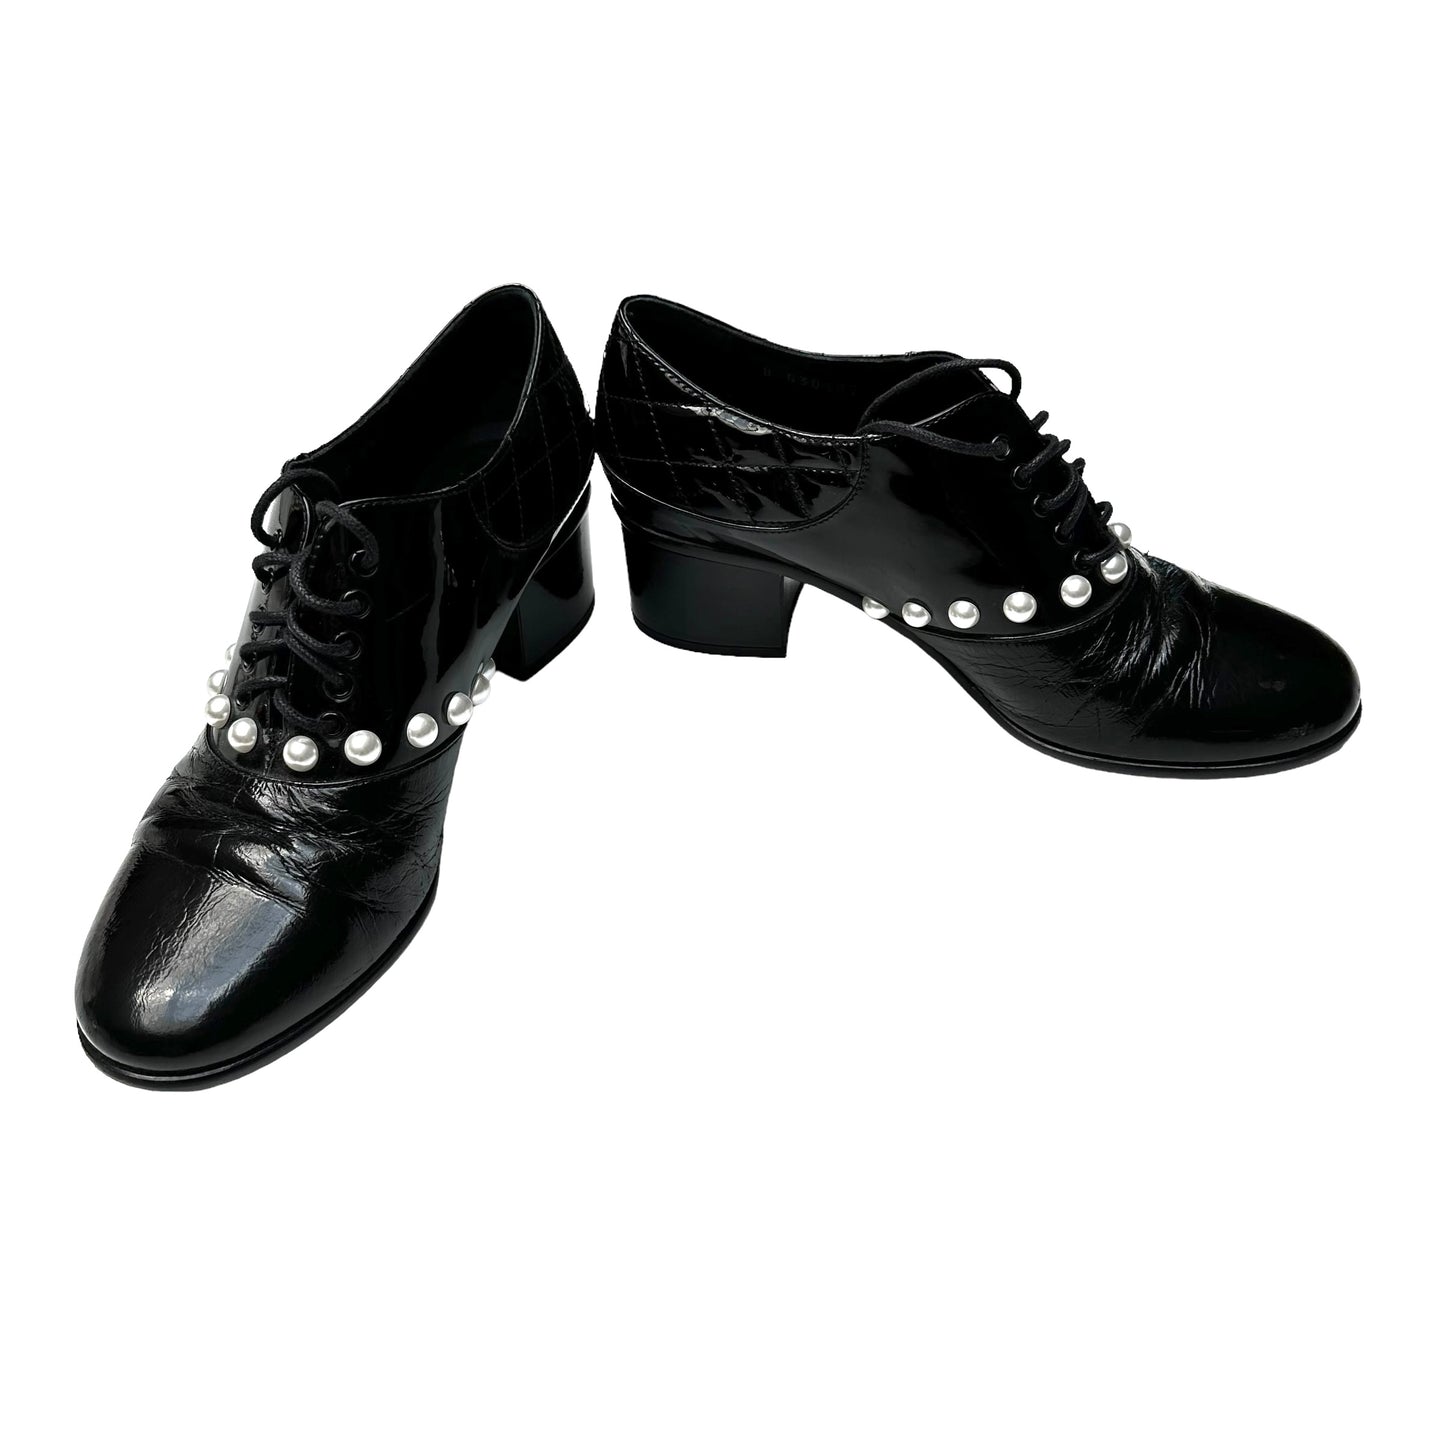 Black Patent Loafers - 9.5